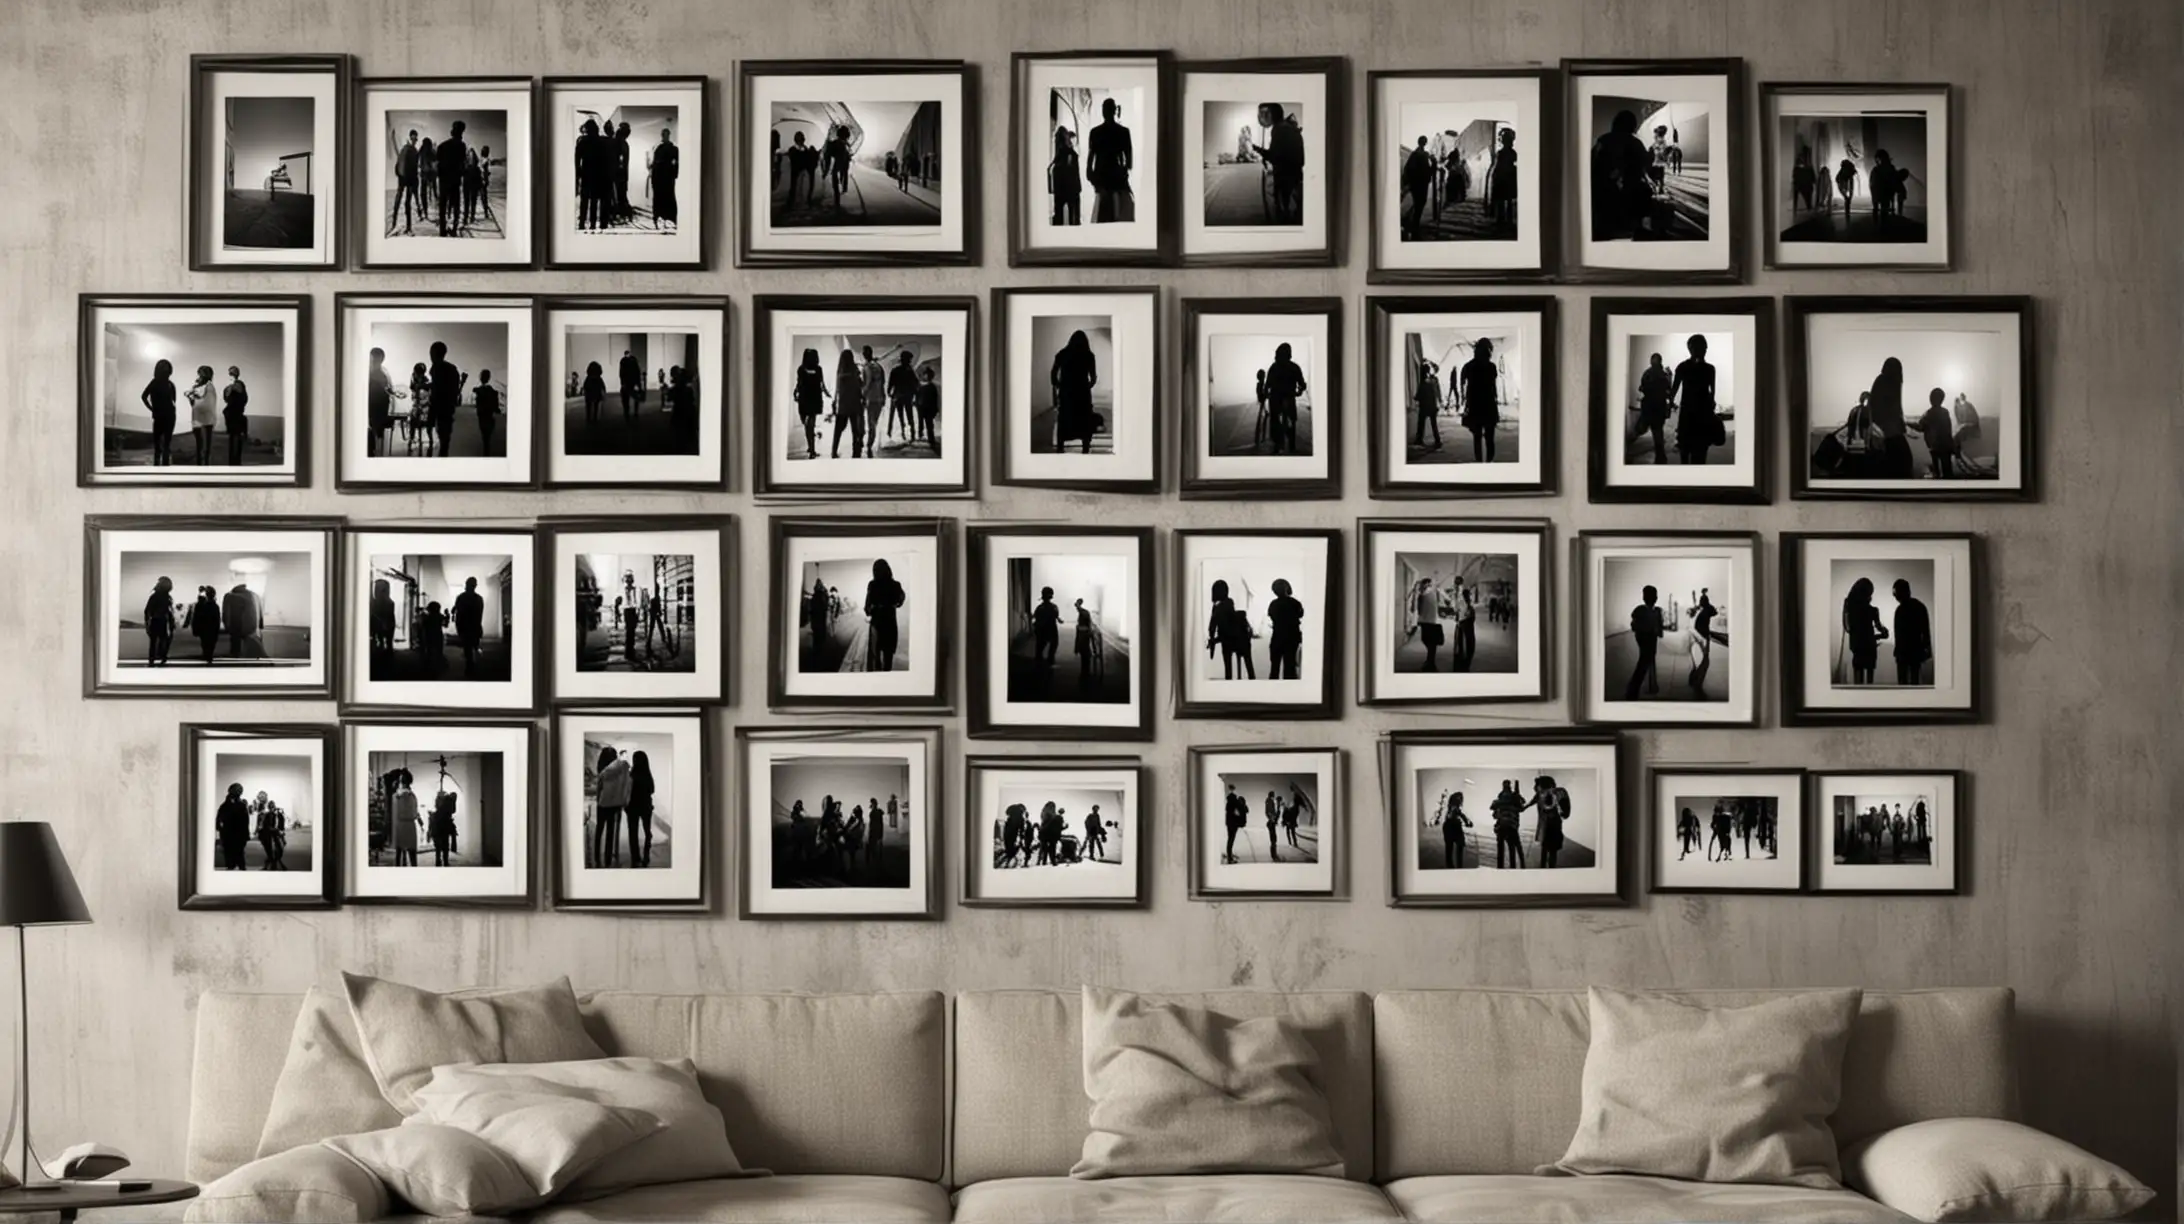 Modern Silhouette Photo Gallery Display on Wall